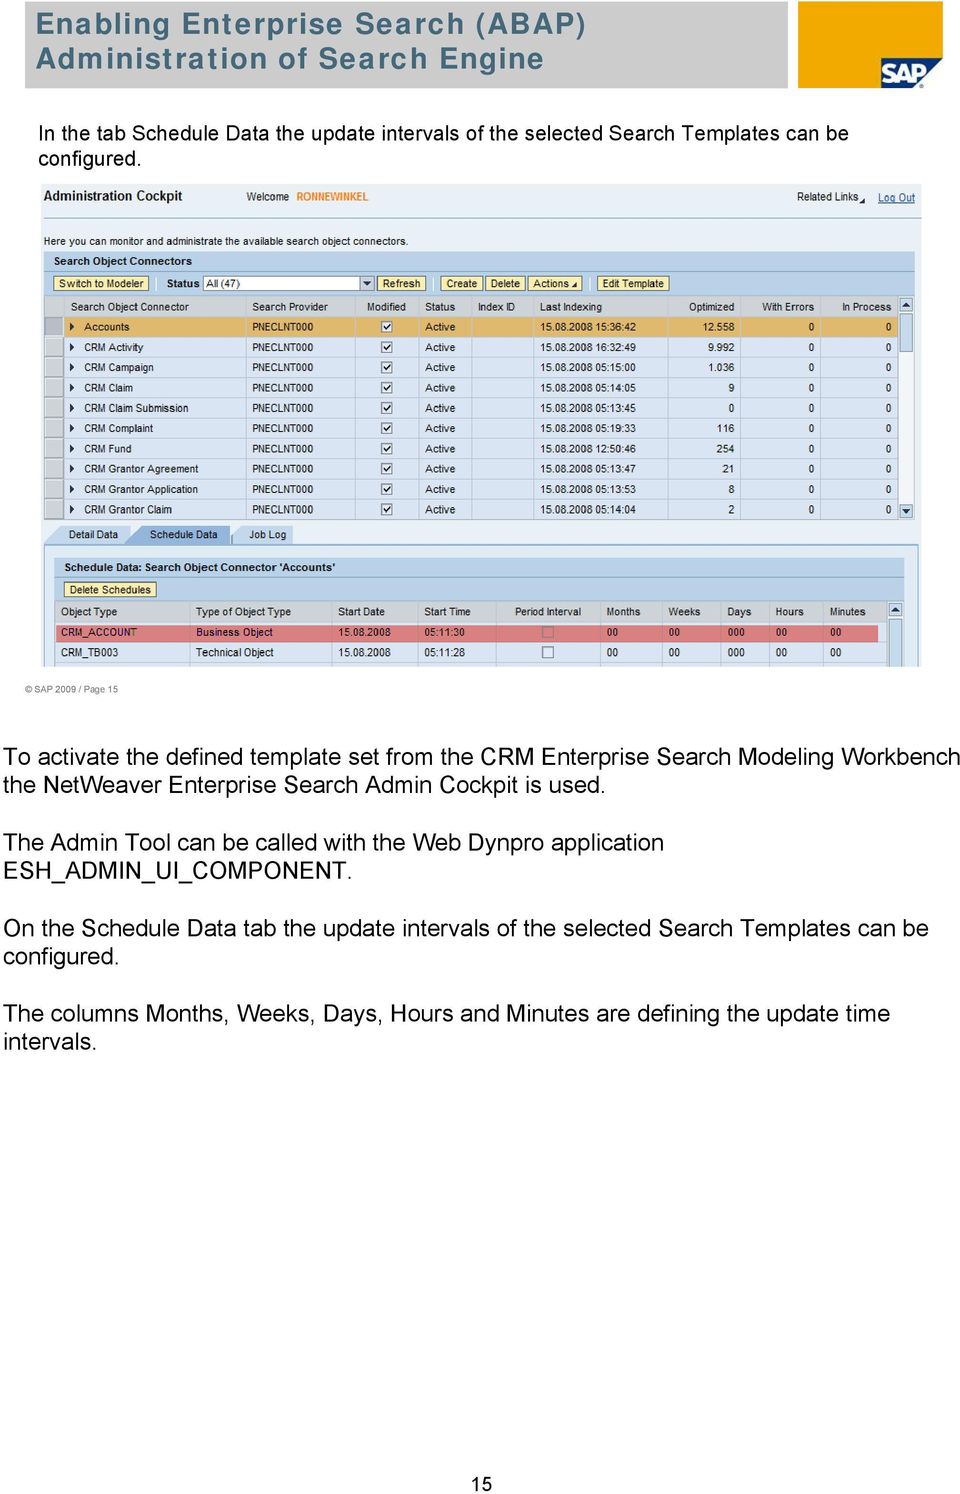 SAP 2009 / Page 15 To activate the defined template set from the CRM Enterprise Search Modeling Workbench the NetWeaver Enterprise Search Admin